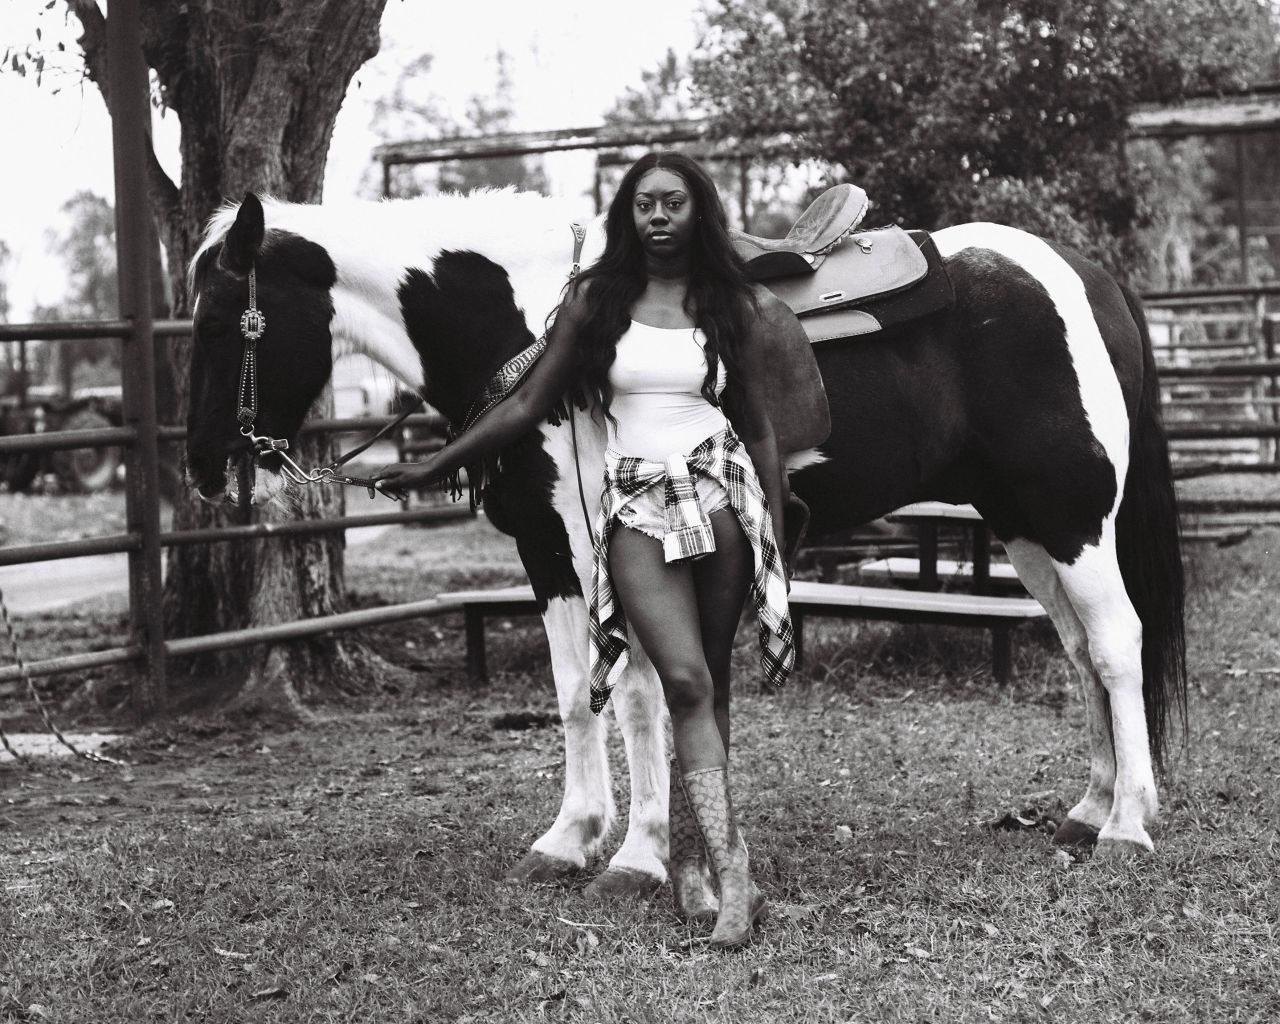 Cowboy culture has long been associated with White men in rural America. In "Ridin' Sucka Free," Kennedi Carter takes portraits of  Black men, women and children who ride and care for horses.